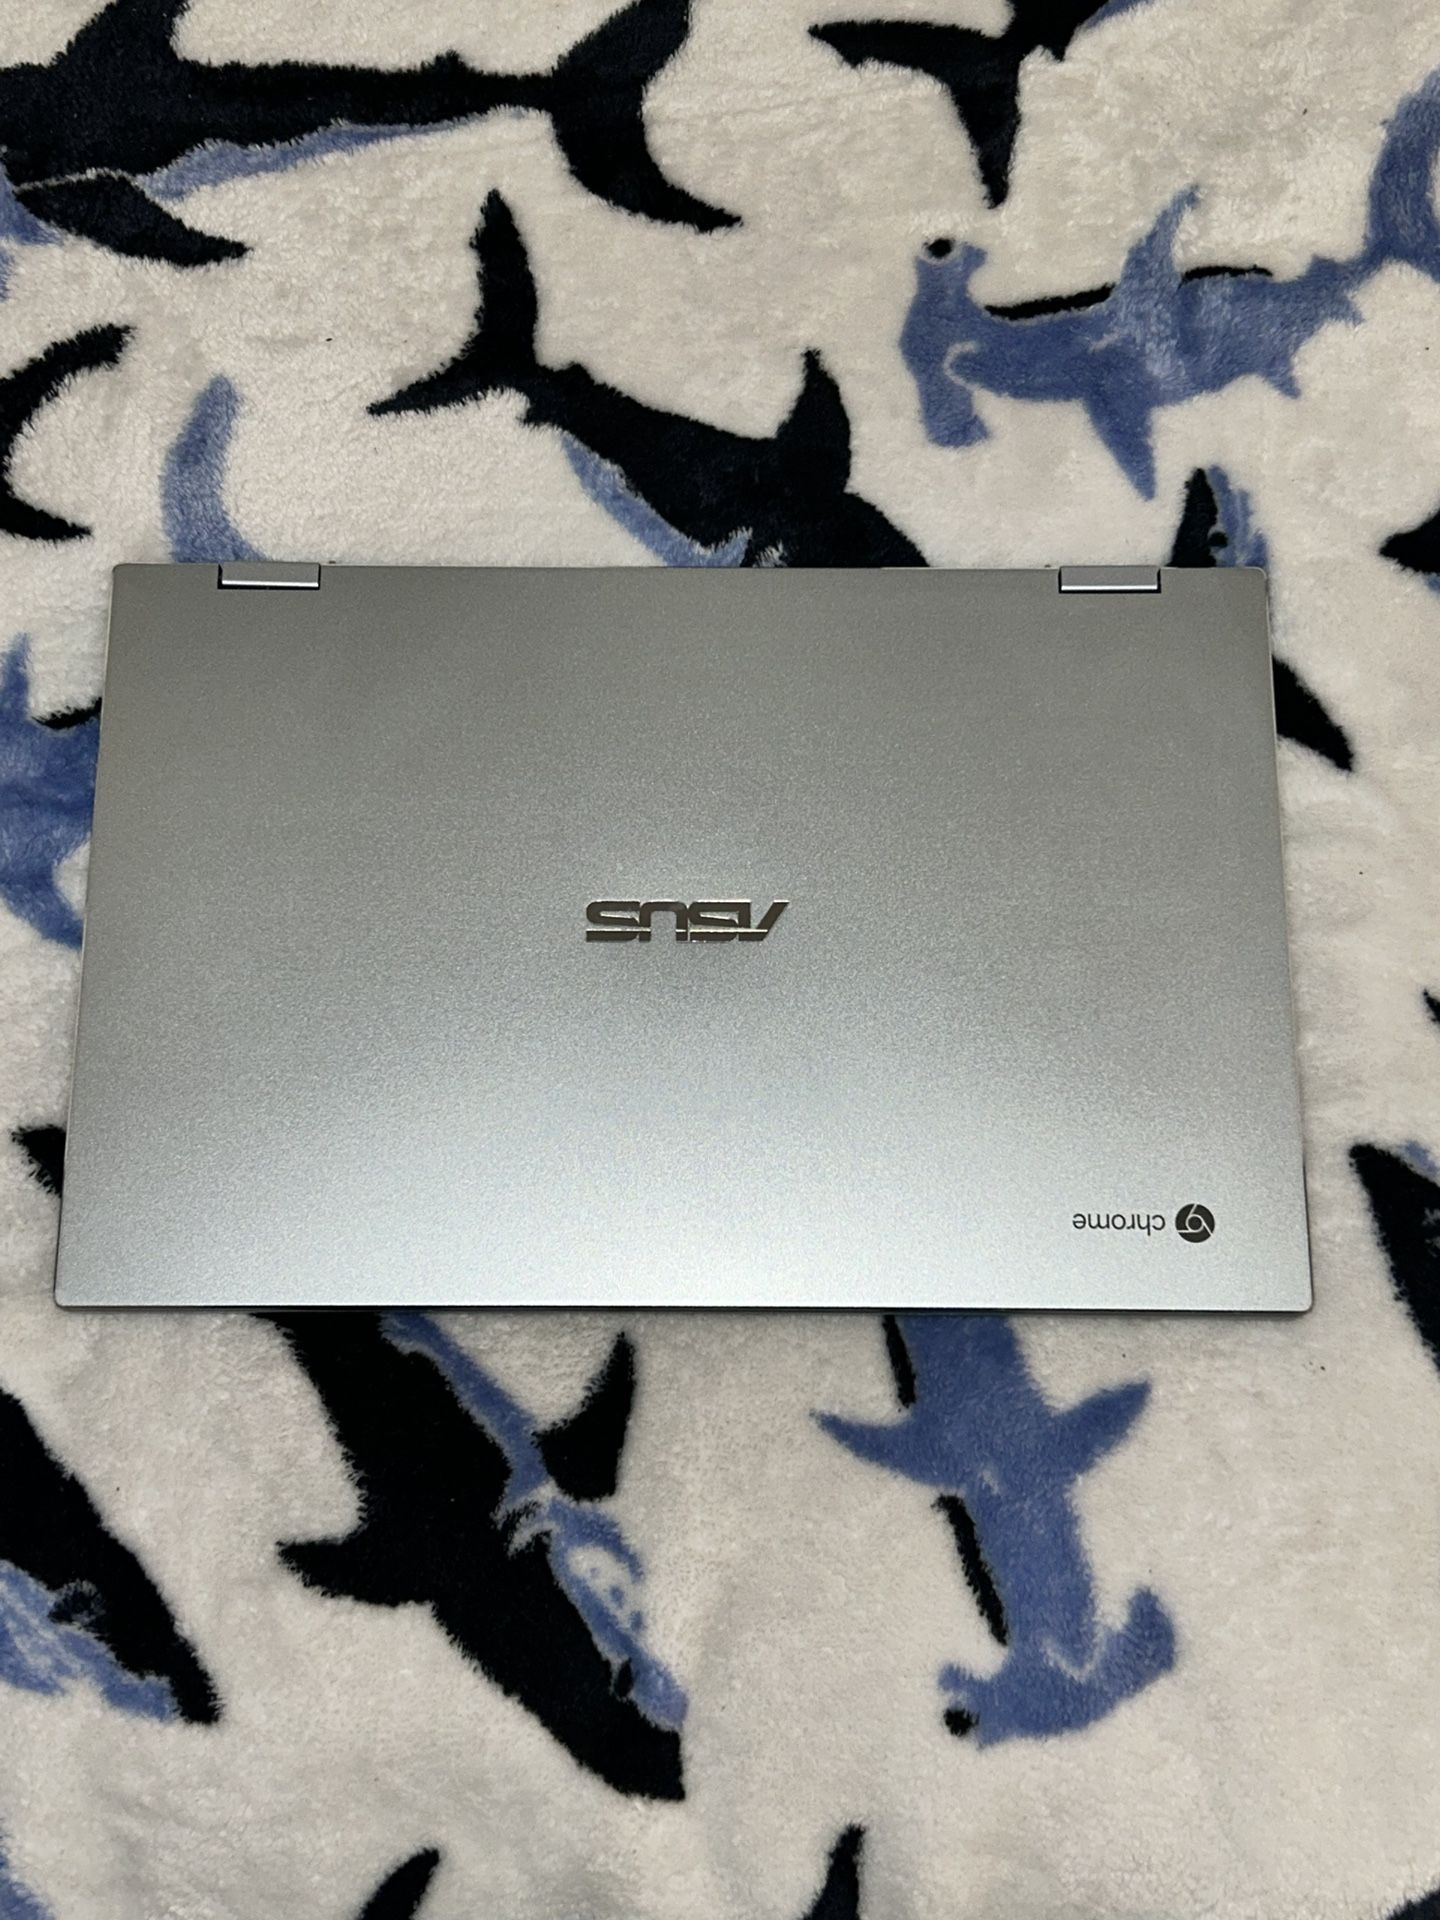 Asus Chromebook Clamshell Laptop